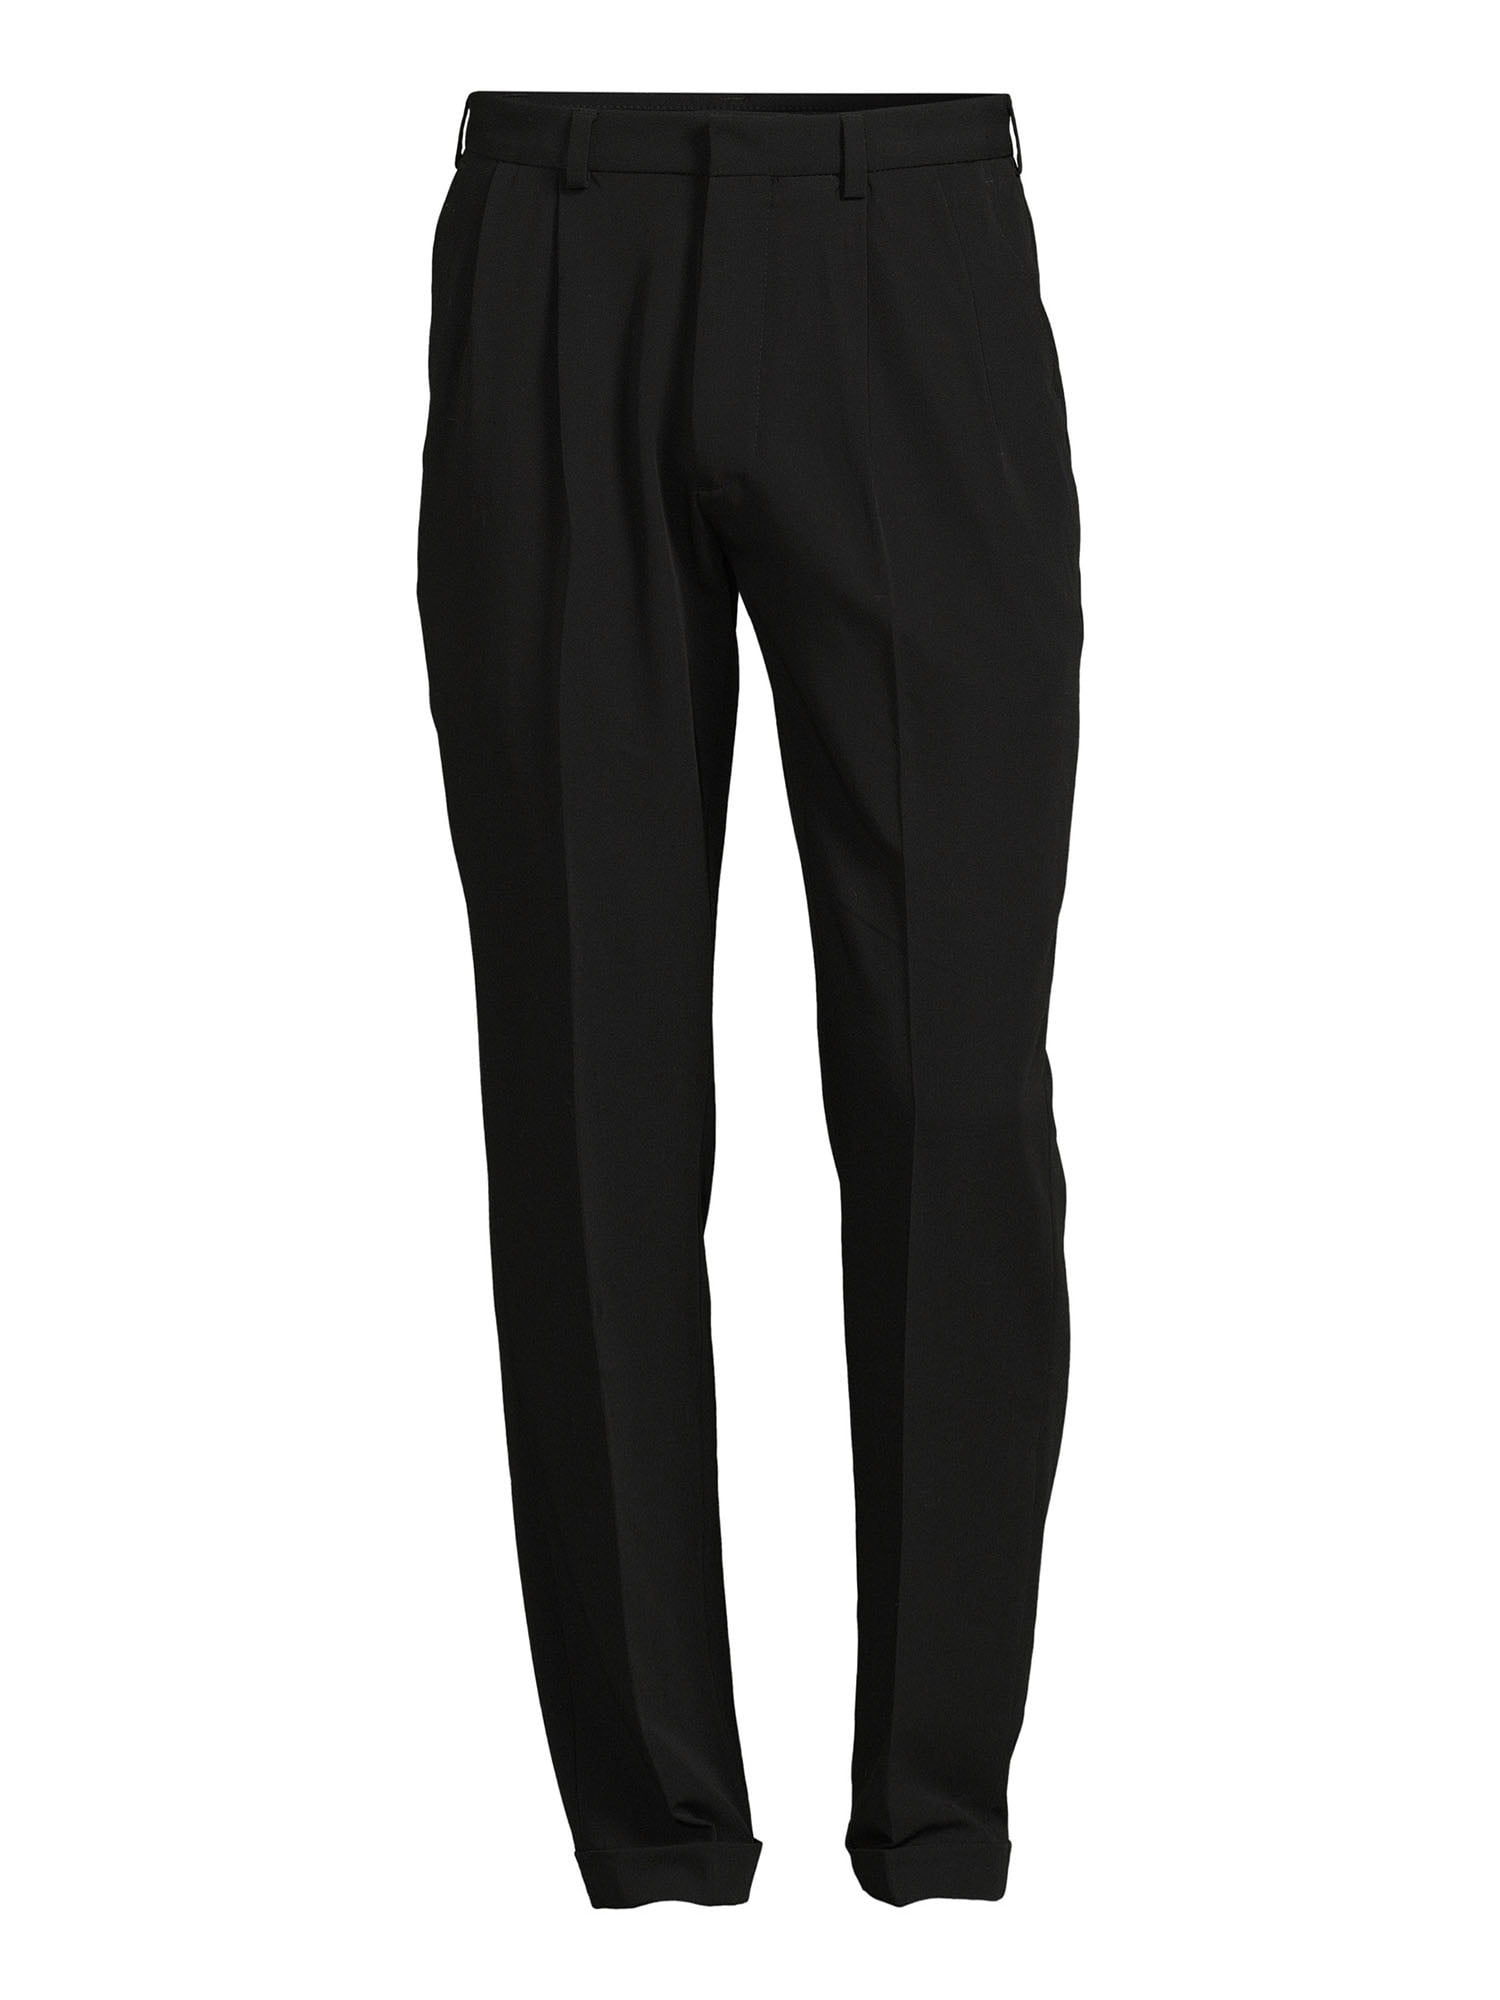 George Men's and Big Men's Premium Comfort Stretch Pleated Cuffed Suit Pants  